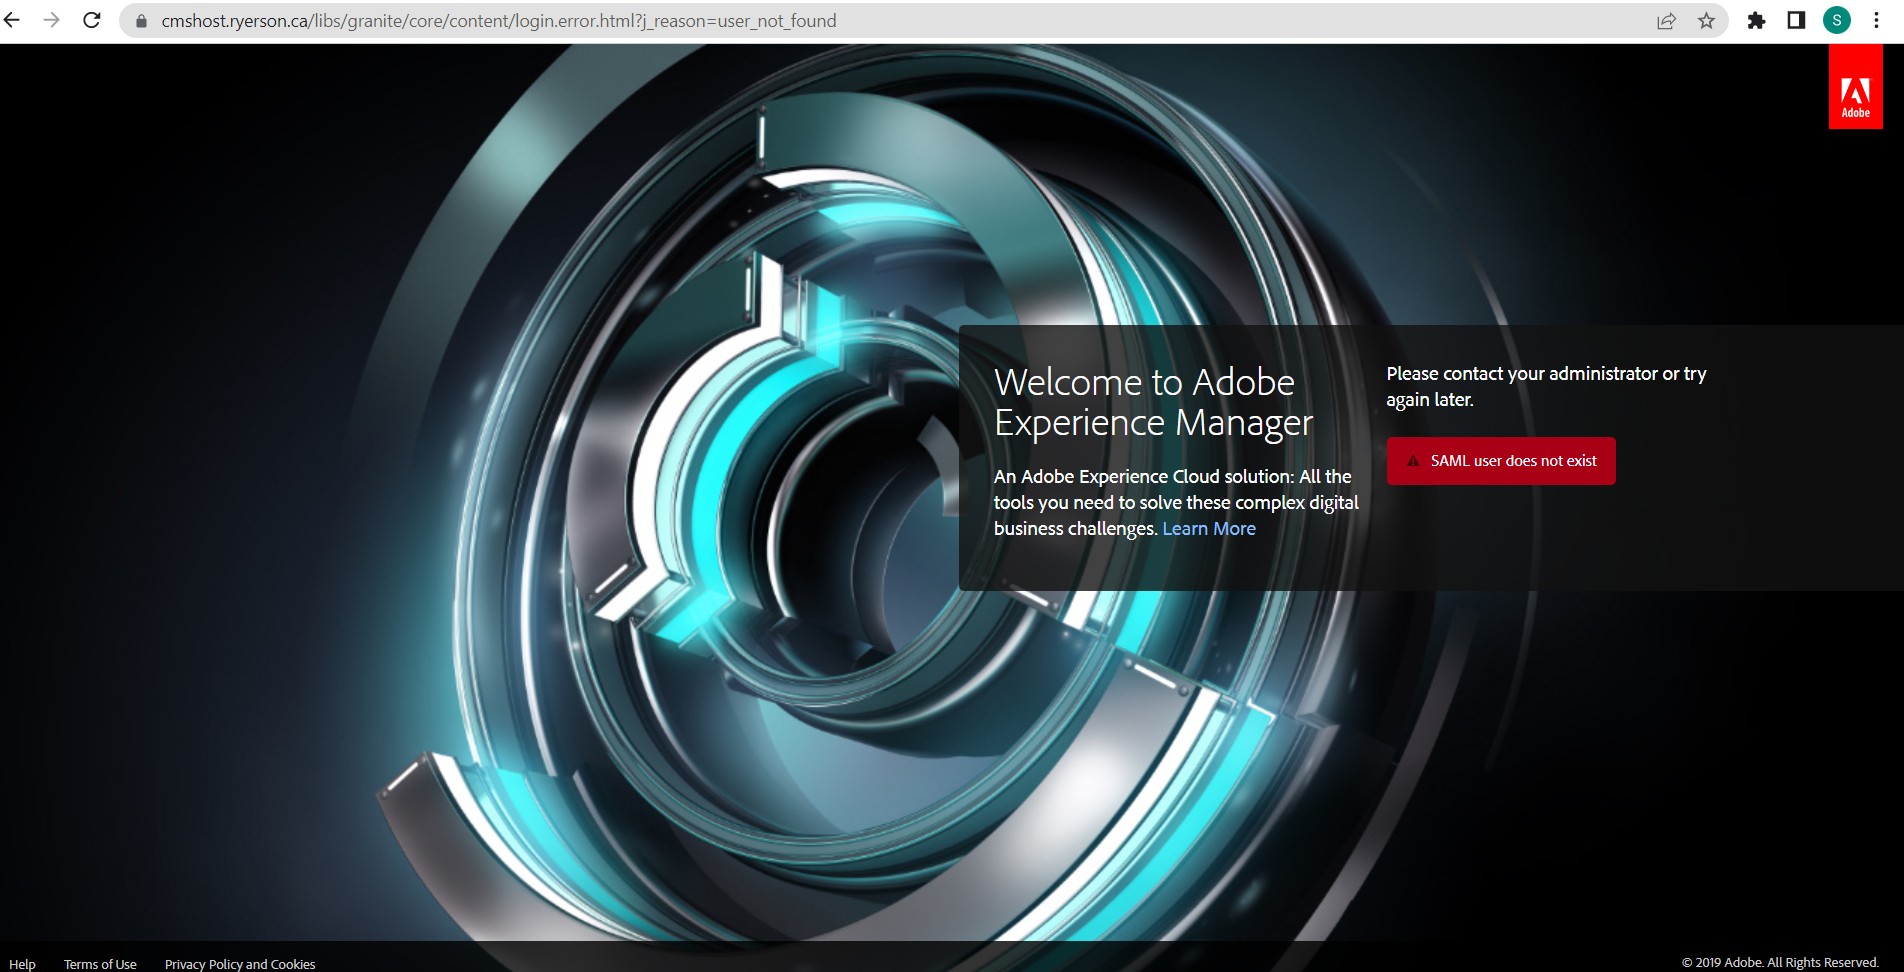 SAML error, which says, "Welcome to Adobe Experience Manager. Please contact your administrator or try again later."